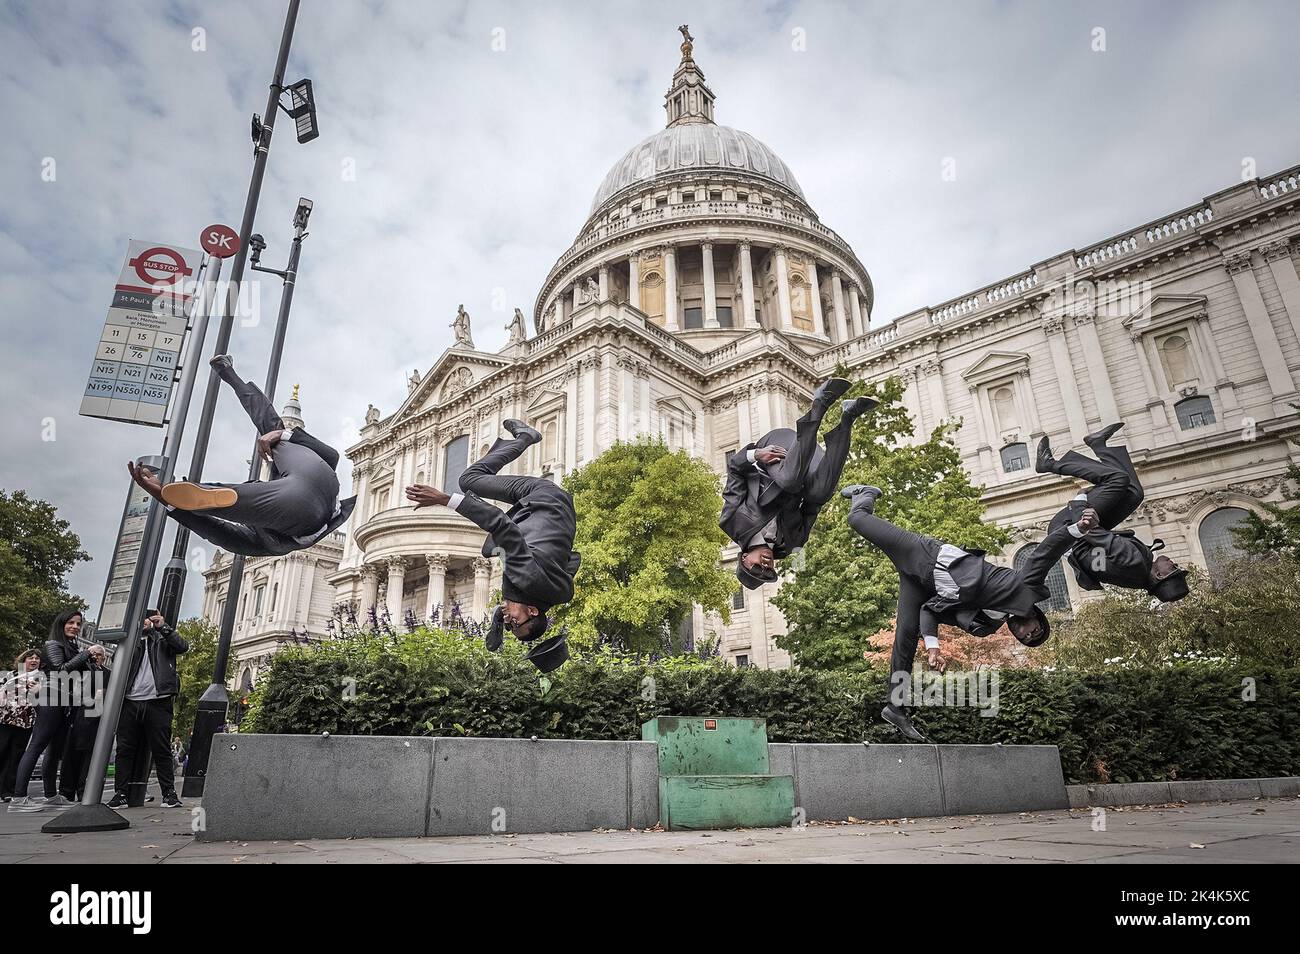 London, UK. 3rd October, 2022. The Black Blues Brothers perform acrobats near St Paul's Cathedral ahead of their autumn UK tour. This troupe of professional acrobats from Kenya are a tribute act to the cult movie The Blues Brothers. Credit: Guy Corbishley/Alamy Live News Stock Photo